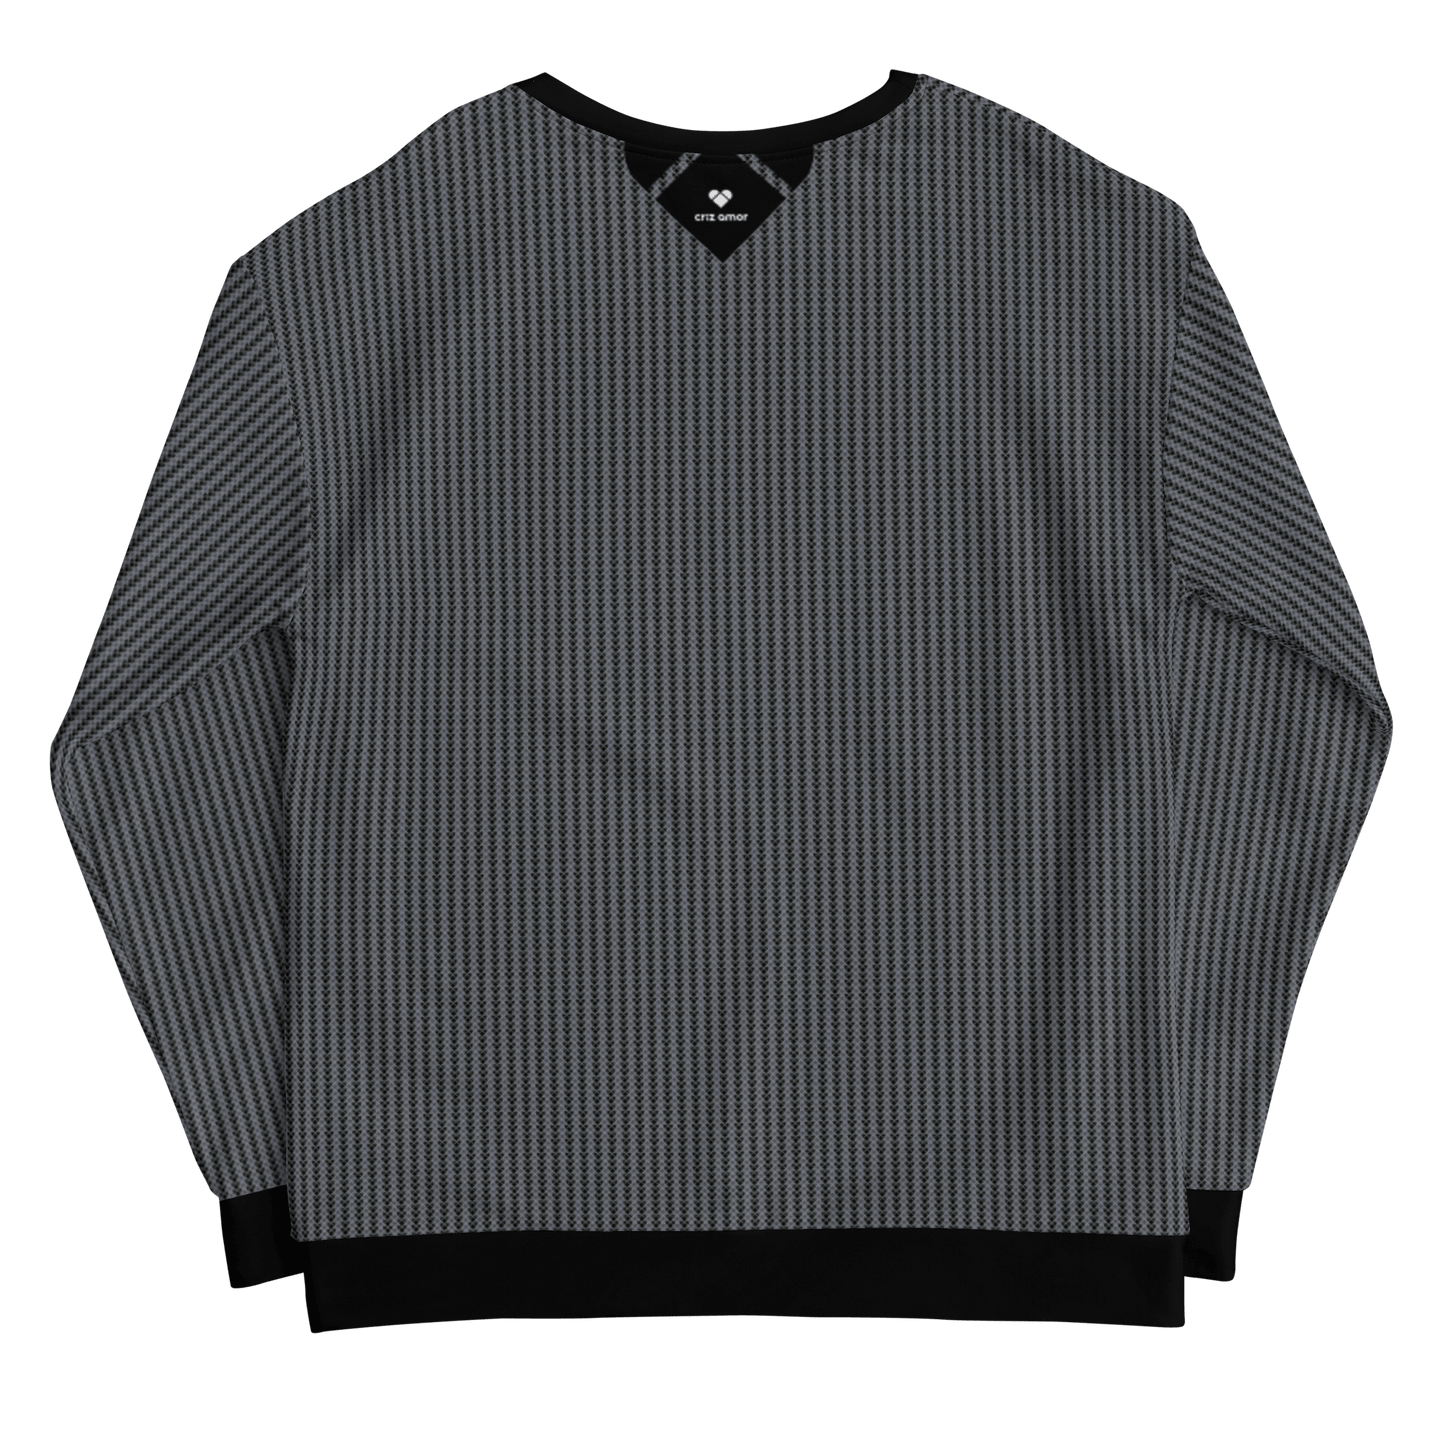 sustainable and eco-friendly black sweatshirt with heart-shaped geometrical logos in two shades of gray, by CRiZ AMOR's Amor Primero Capsule Collection